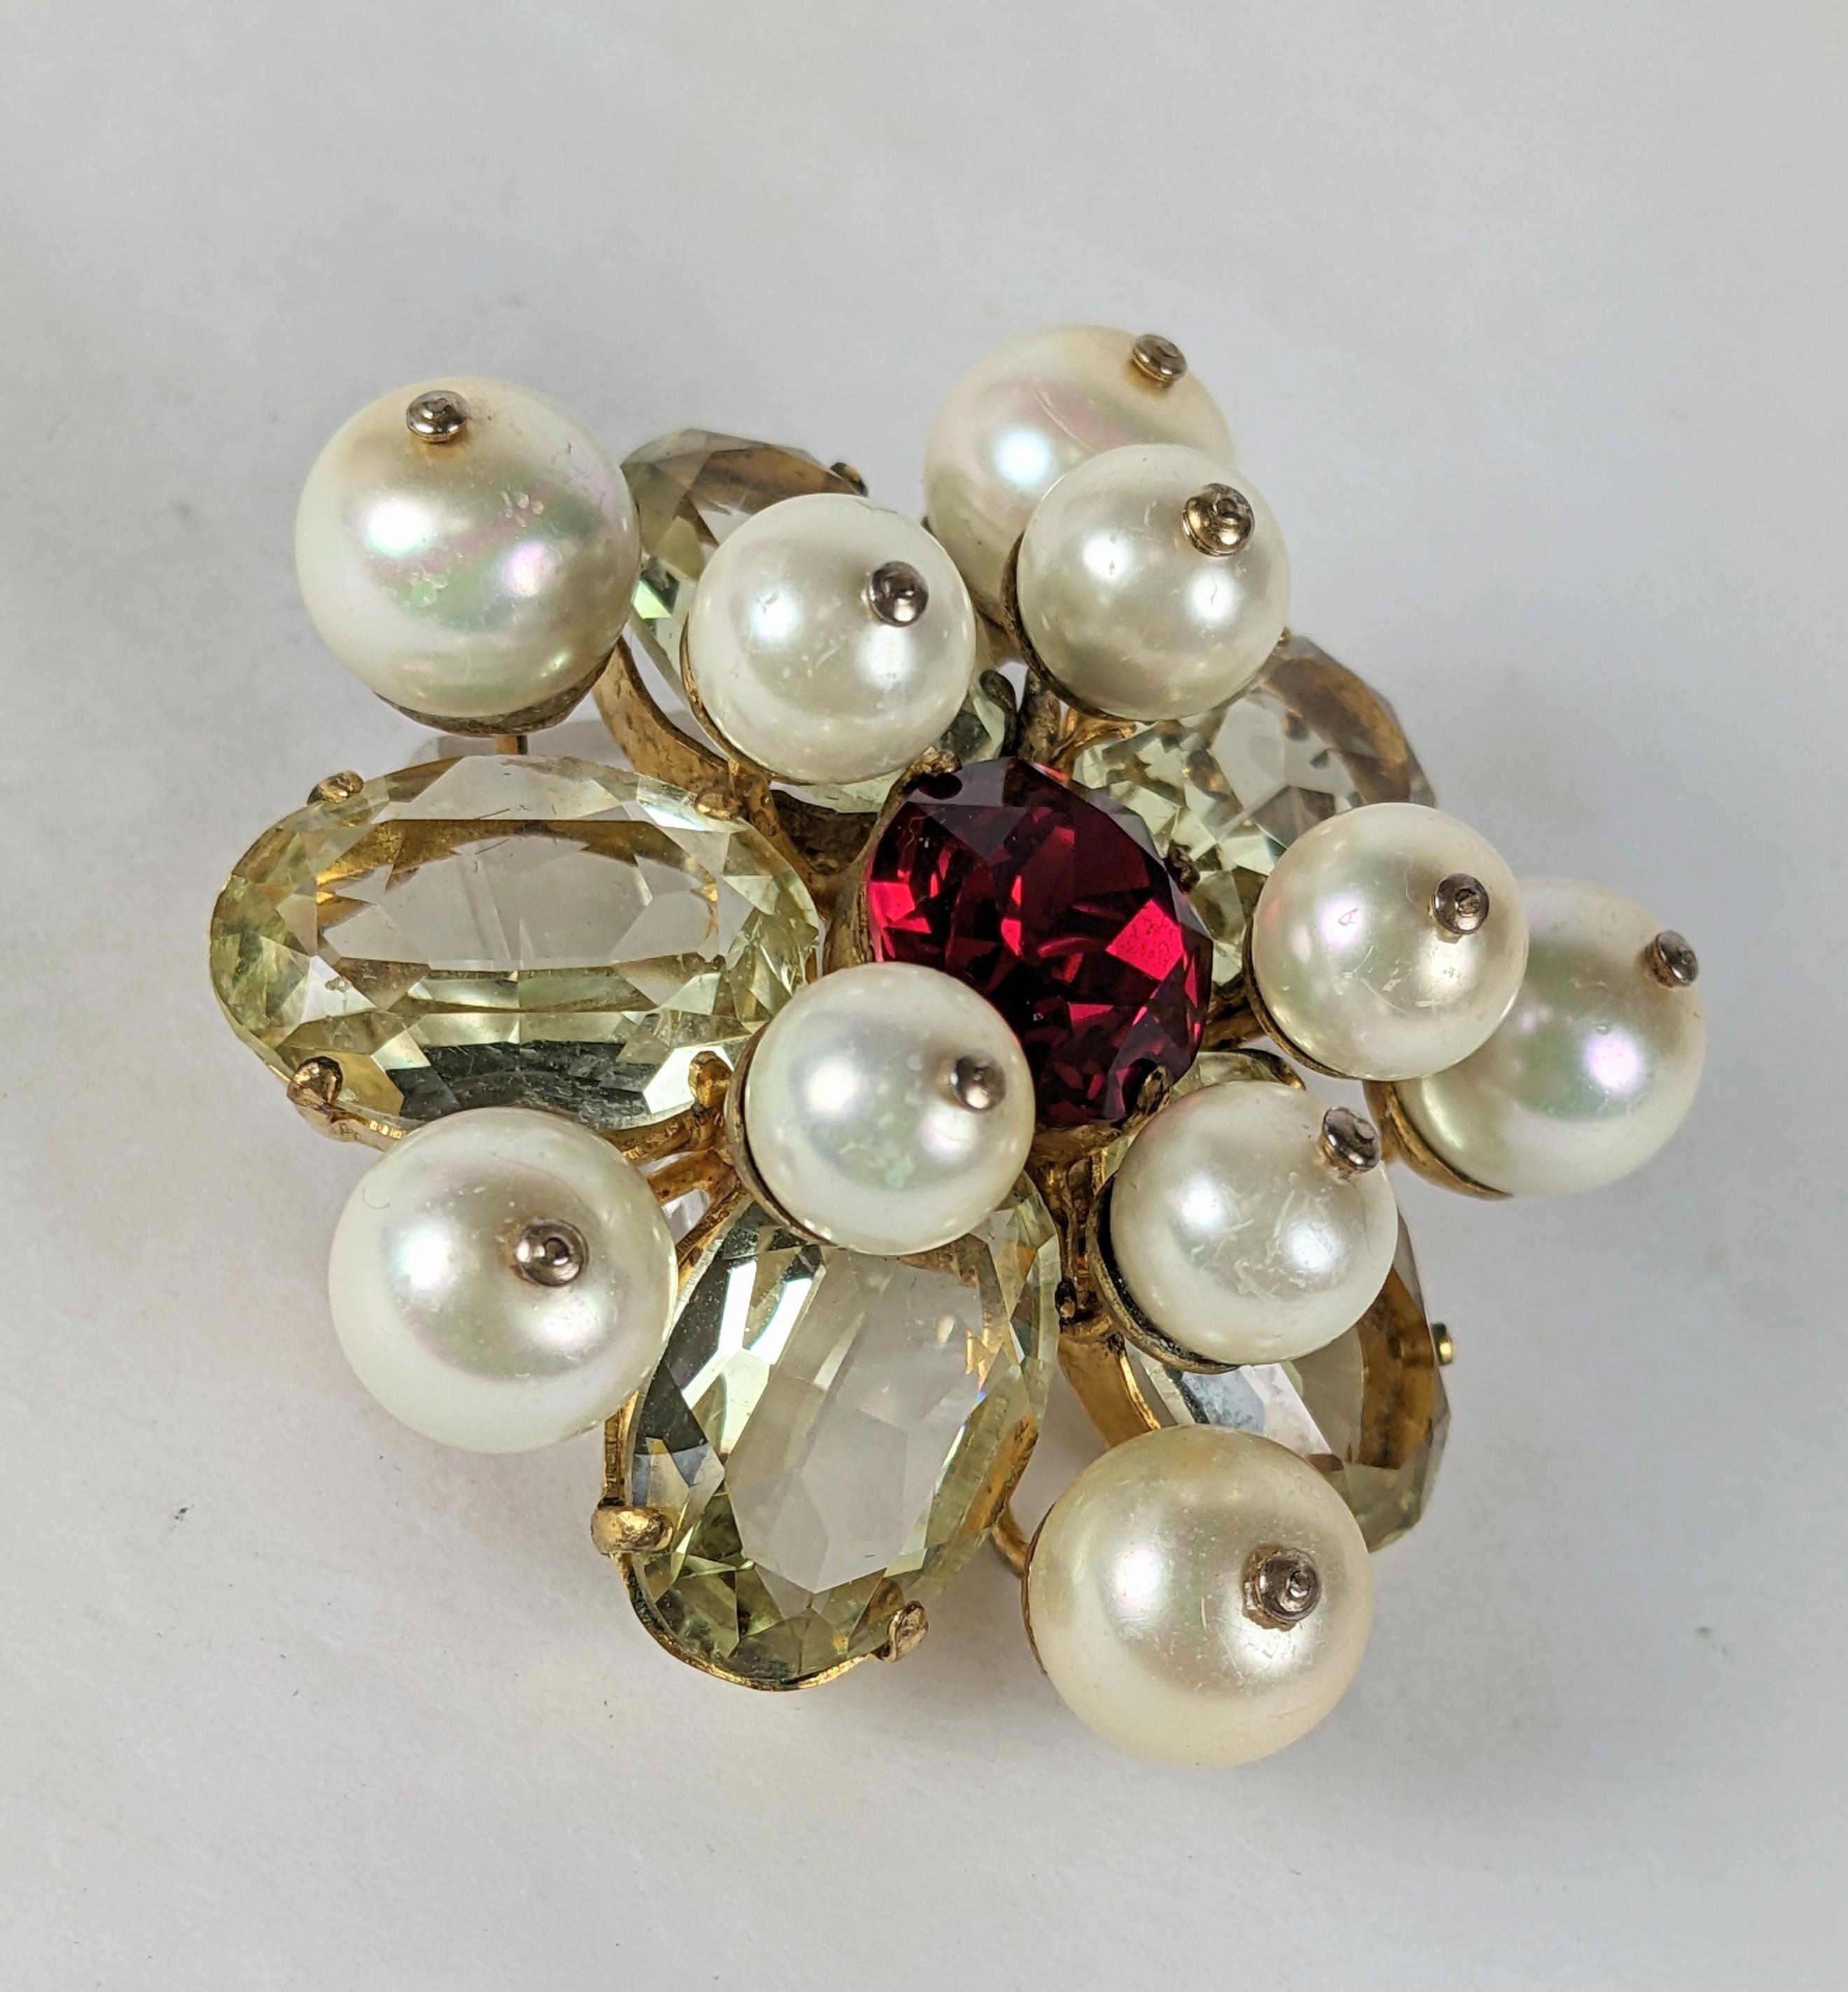  Roger Jean Pierre for Christian Dior Crest Brooch In Good Condition For Sale In New York, NY